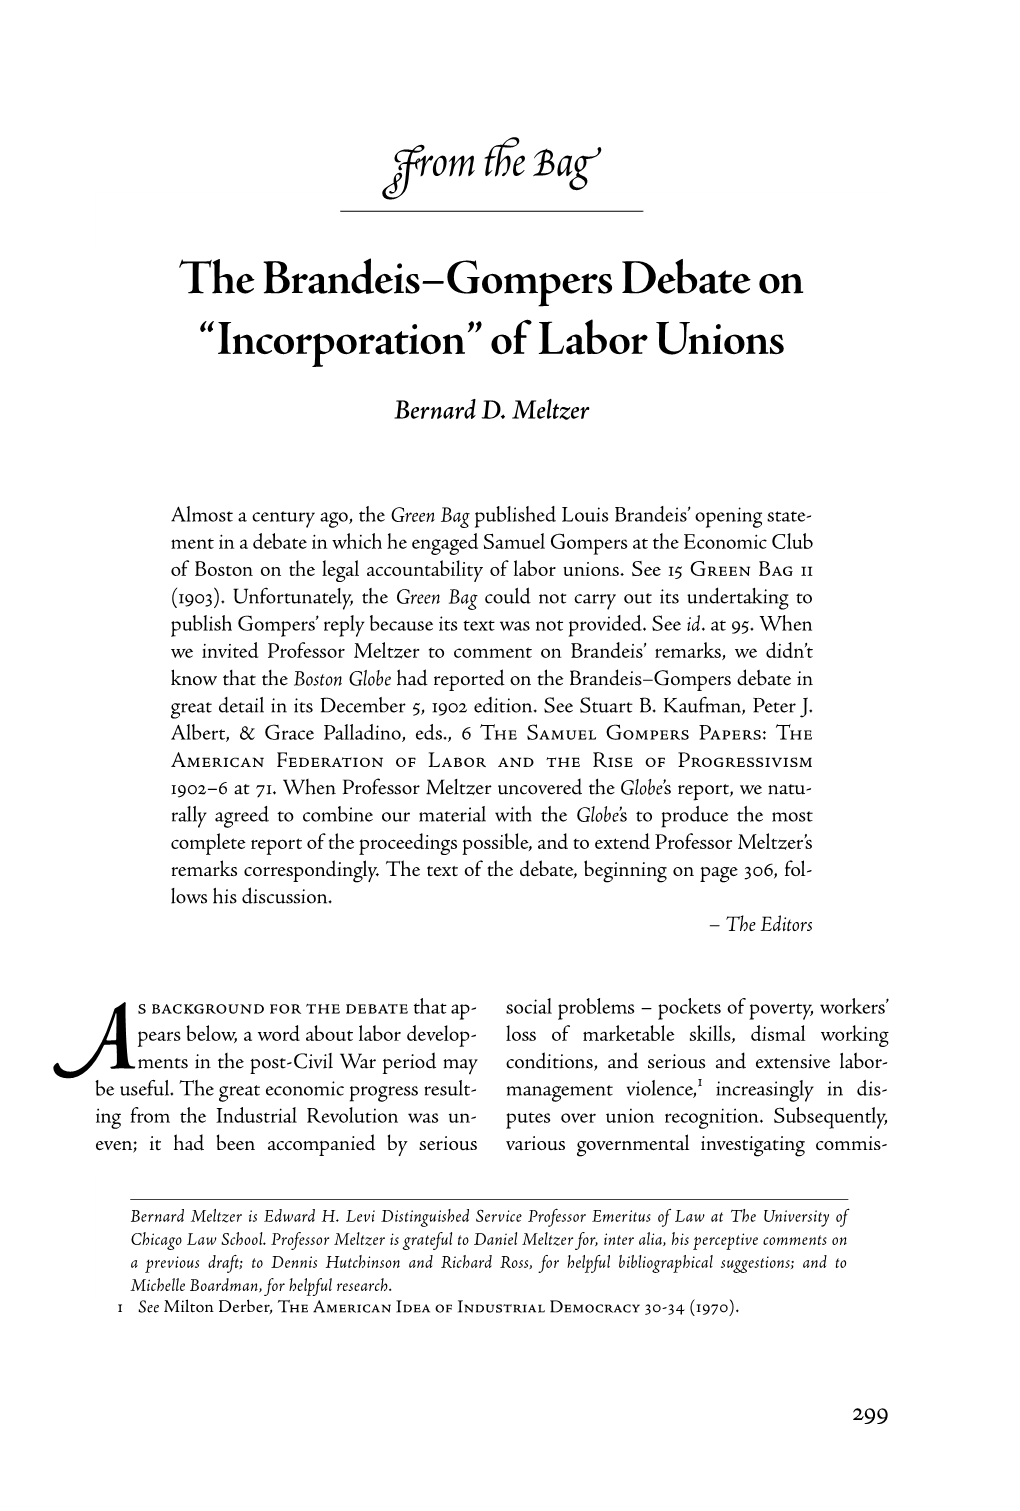 From E Bag the Brandeis–Gompers Debate On